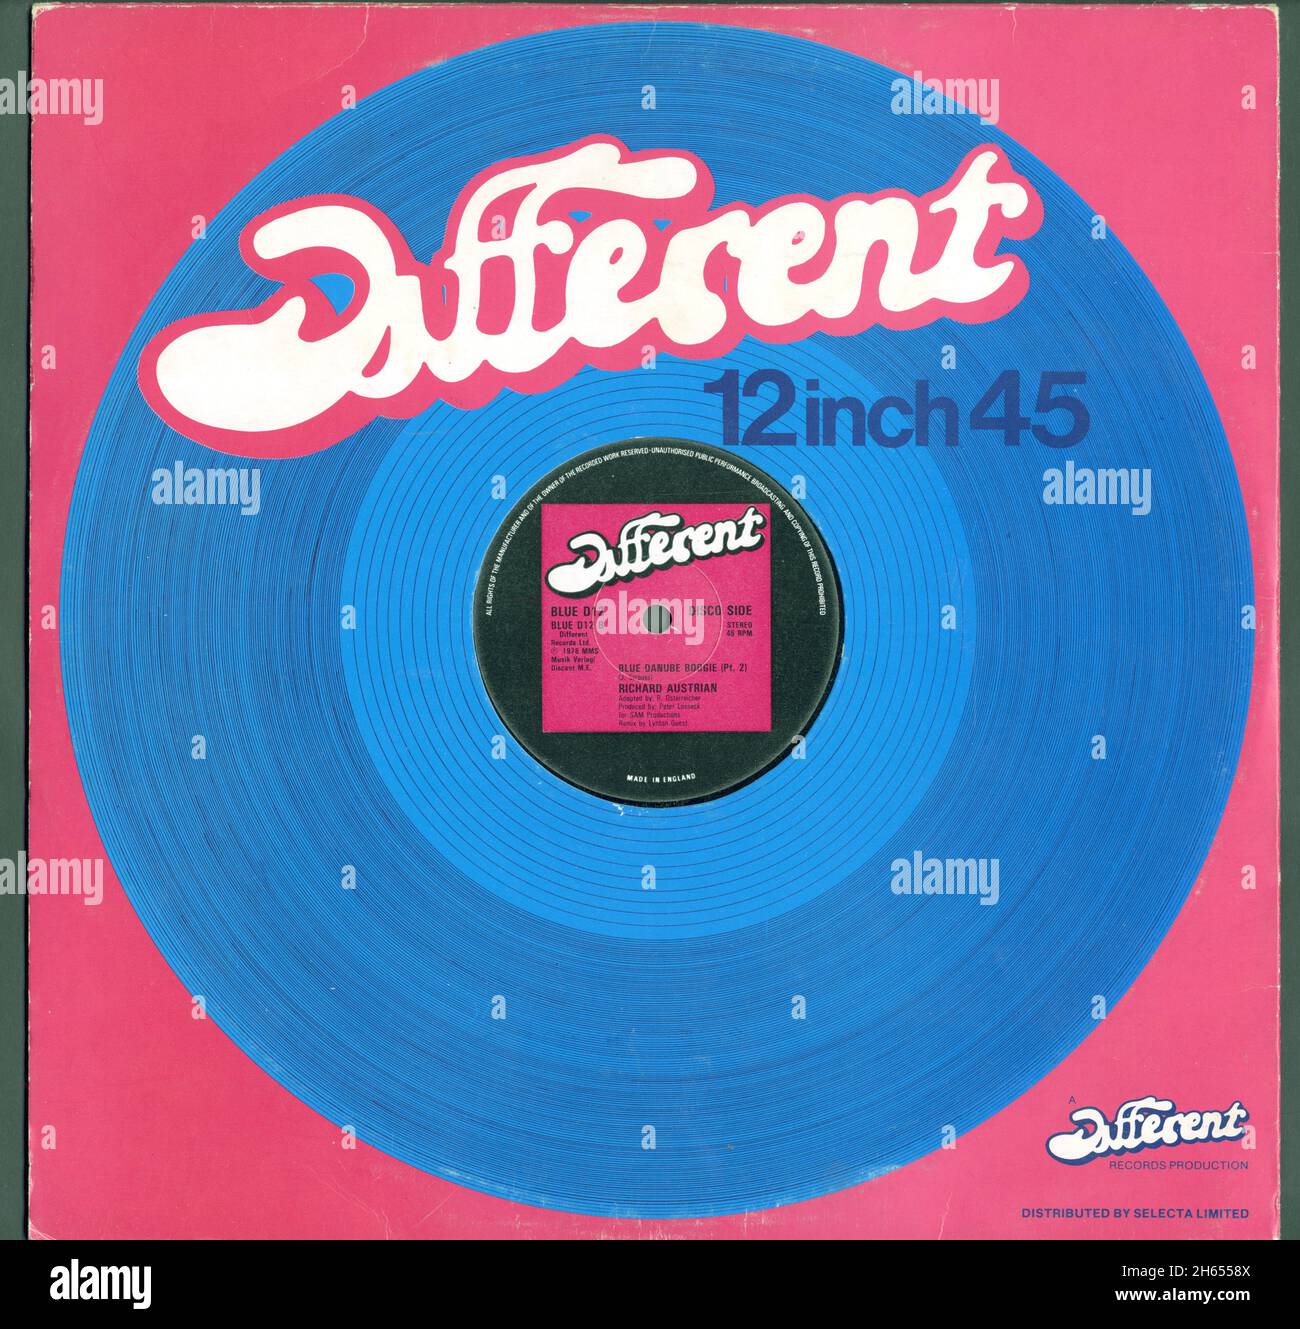 Different Records was a short lived indie British reggae label operating during 1978 and 1979, based in London but cutting many of their records in Jamaica. This is their generic 12' sleeve which has no design credits but still looks groovy over forty years on. The blue vinyl disc design is done by hand. My guess is that they used a fine Rotring ink pen with a compass attachment, and it must have taken ages (I know, I used to have one!).  The Different logo is good too, drawn by hand but again not unlike hip indie record logos of the 1990s. Stock Photo